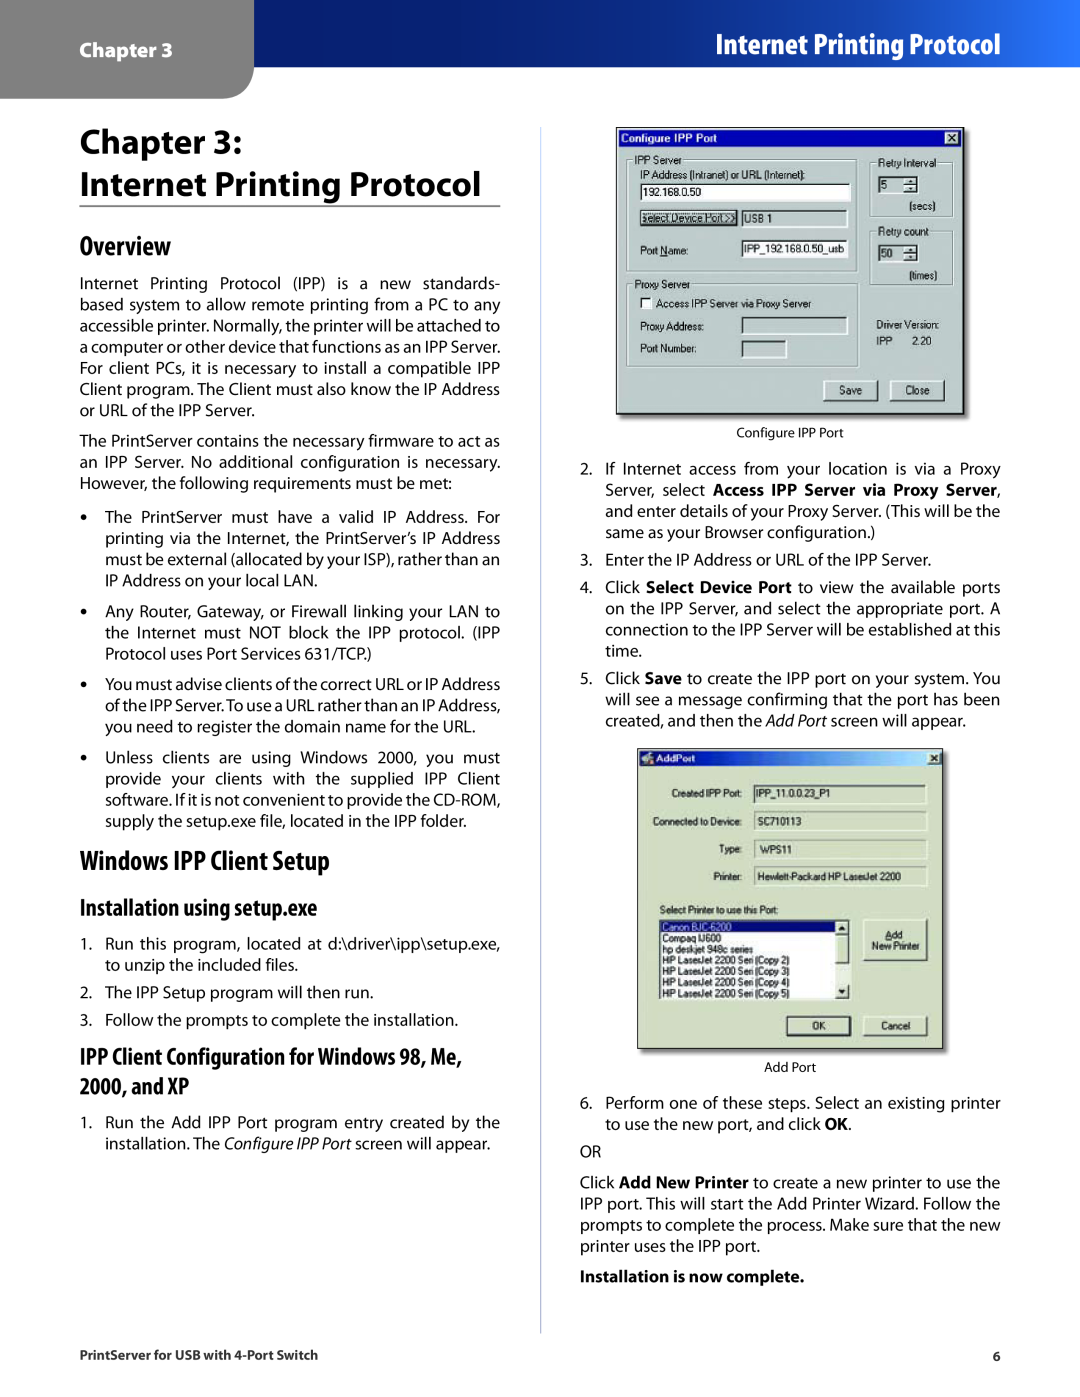 Cisco Systems PSUS4 Chapter Internet Printing Protocol, Overview, Windows IPP Client Setup, Installation using setup.exe 